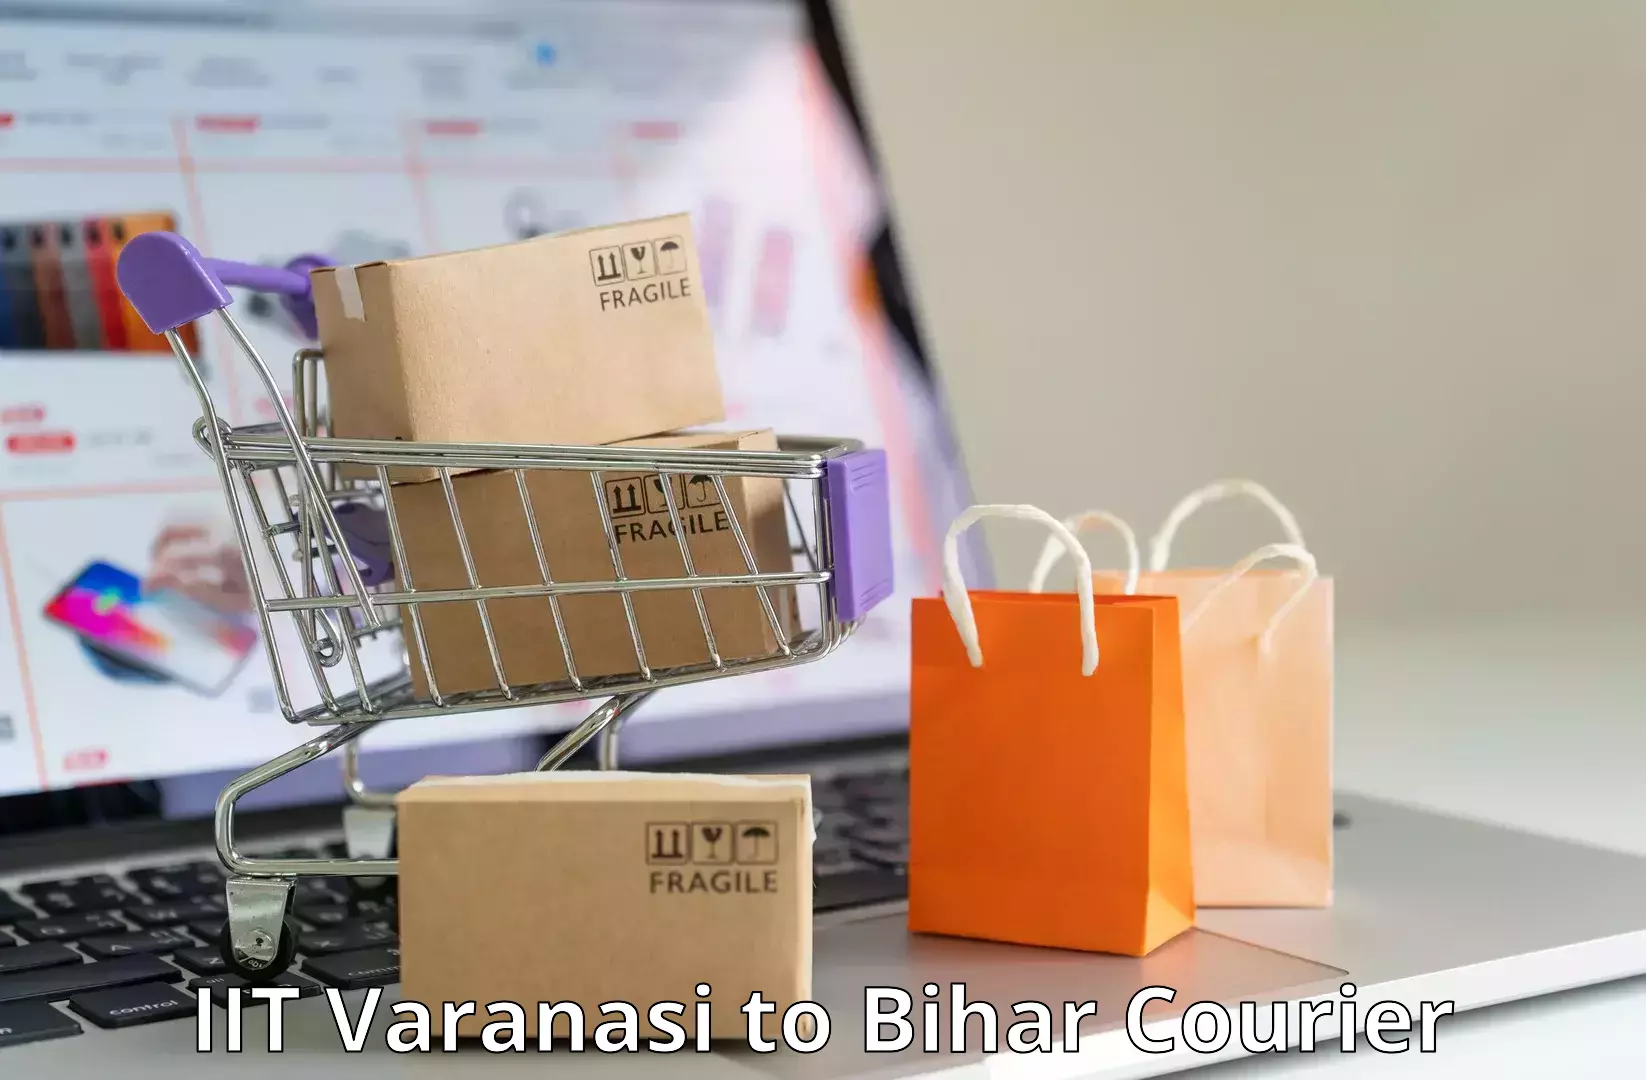 Multi-national courier services IIT Varanasi to Makhdumpur